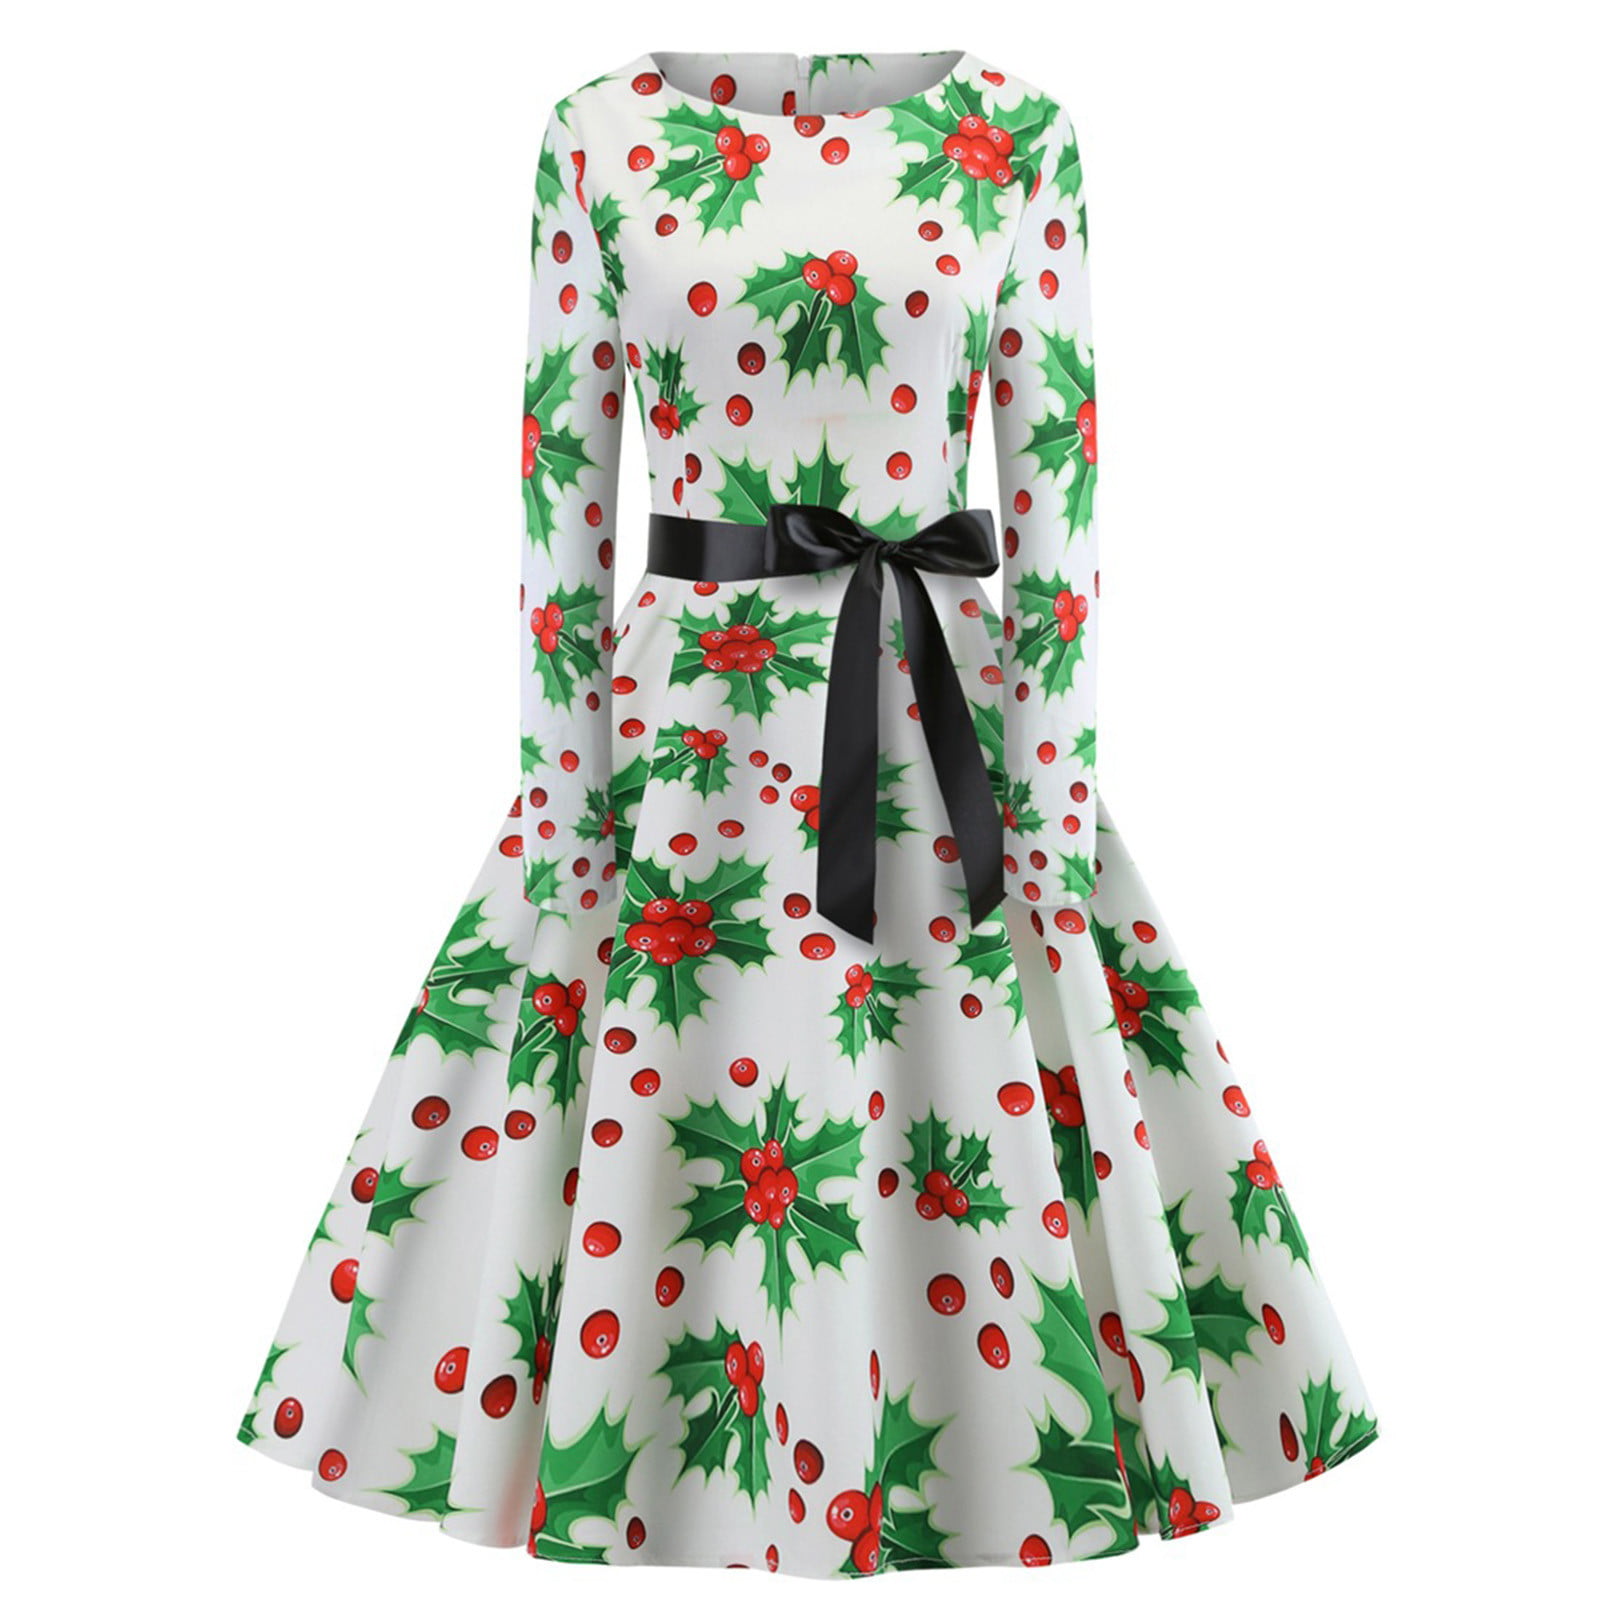 Vintage O-Neck Print Shirt Sleeve Evening Party Swing Pleated Dress Women's Christmas Dresses